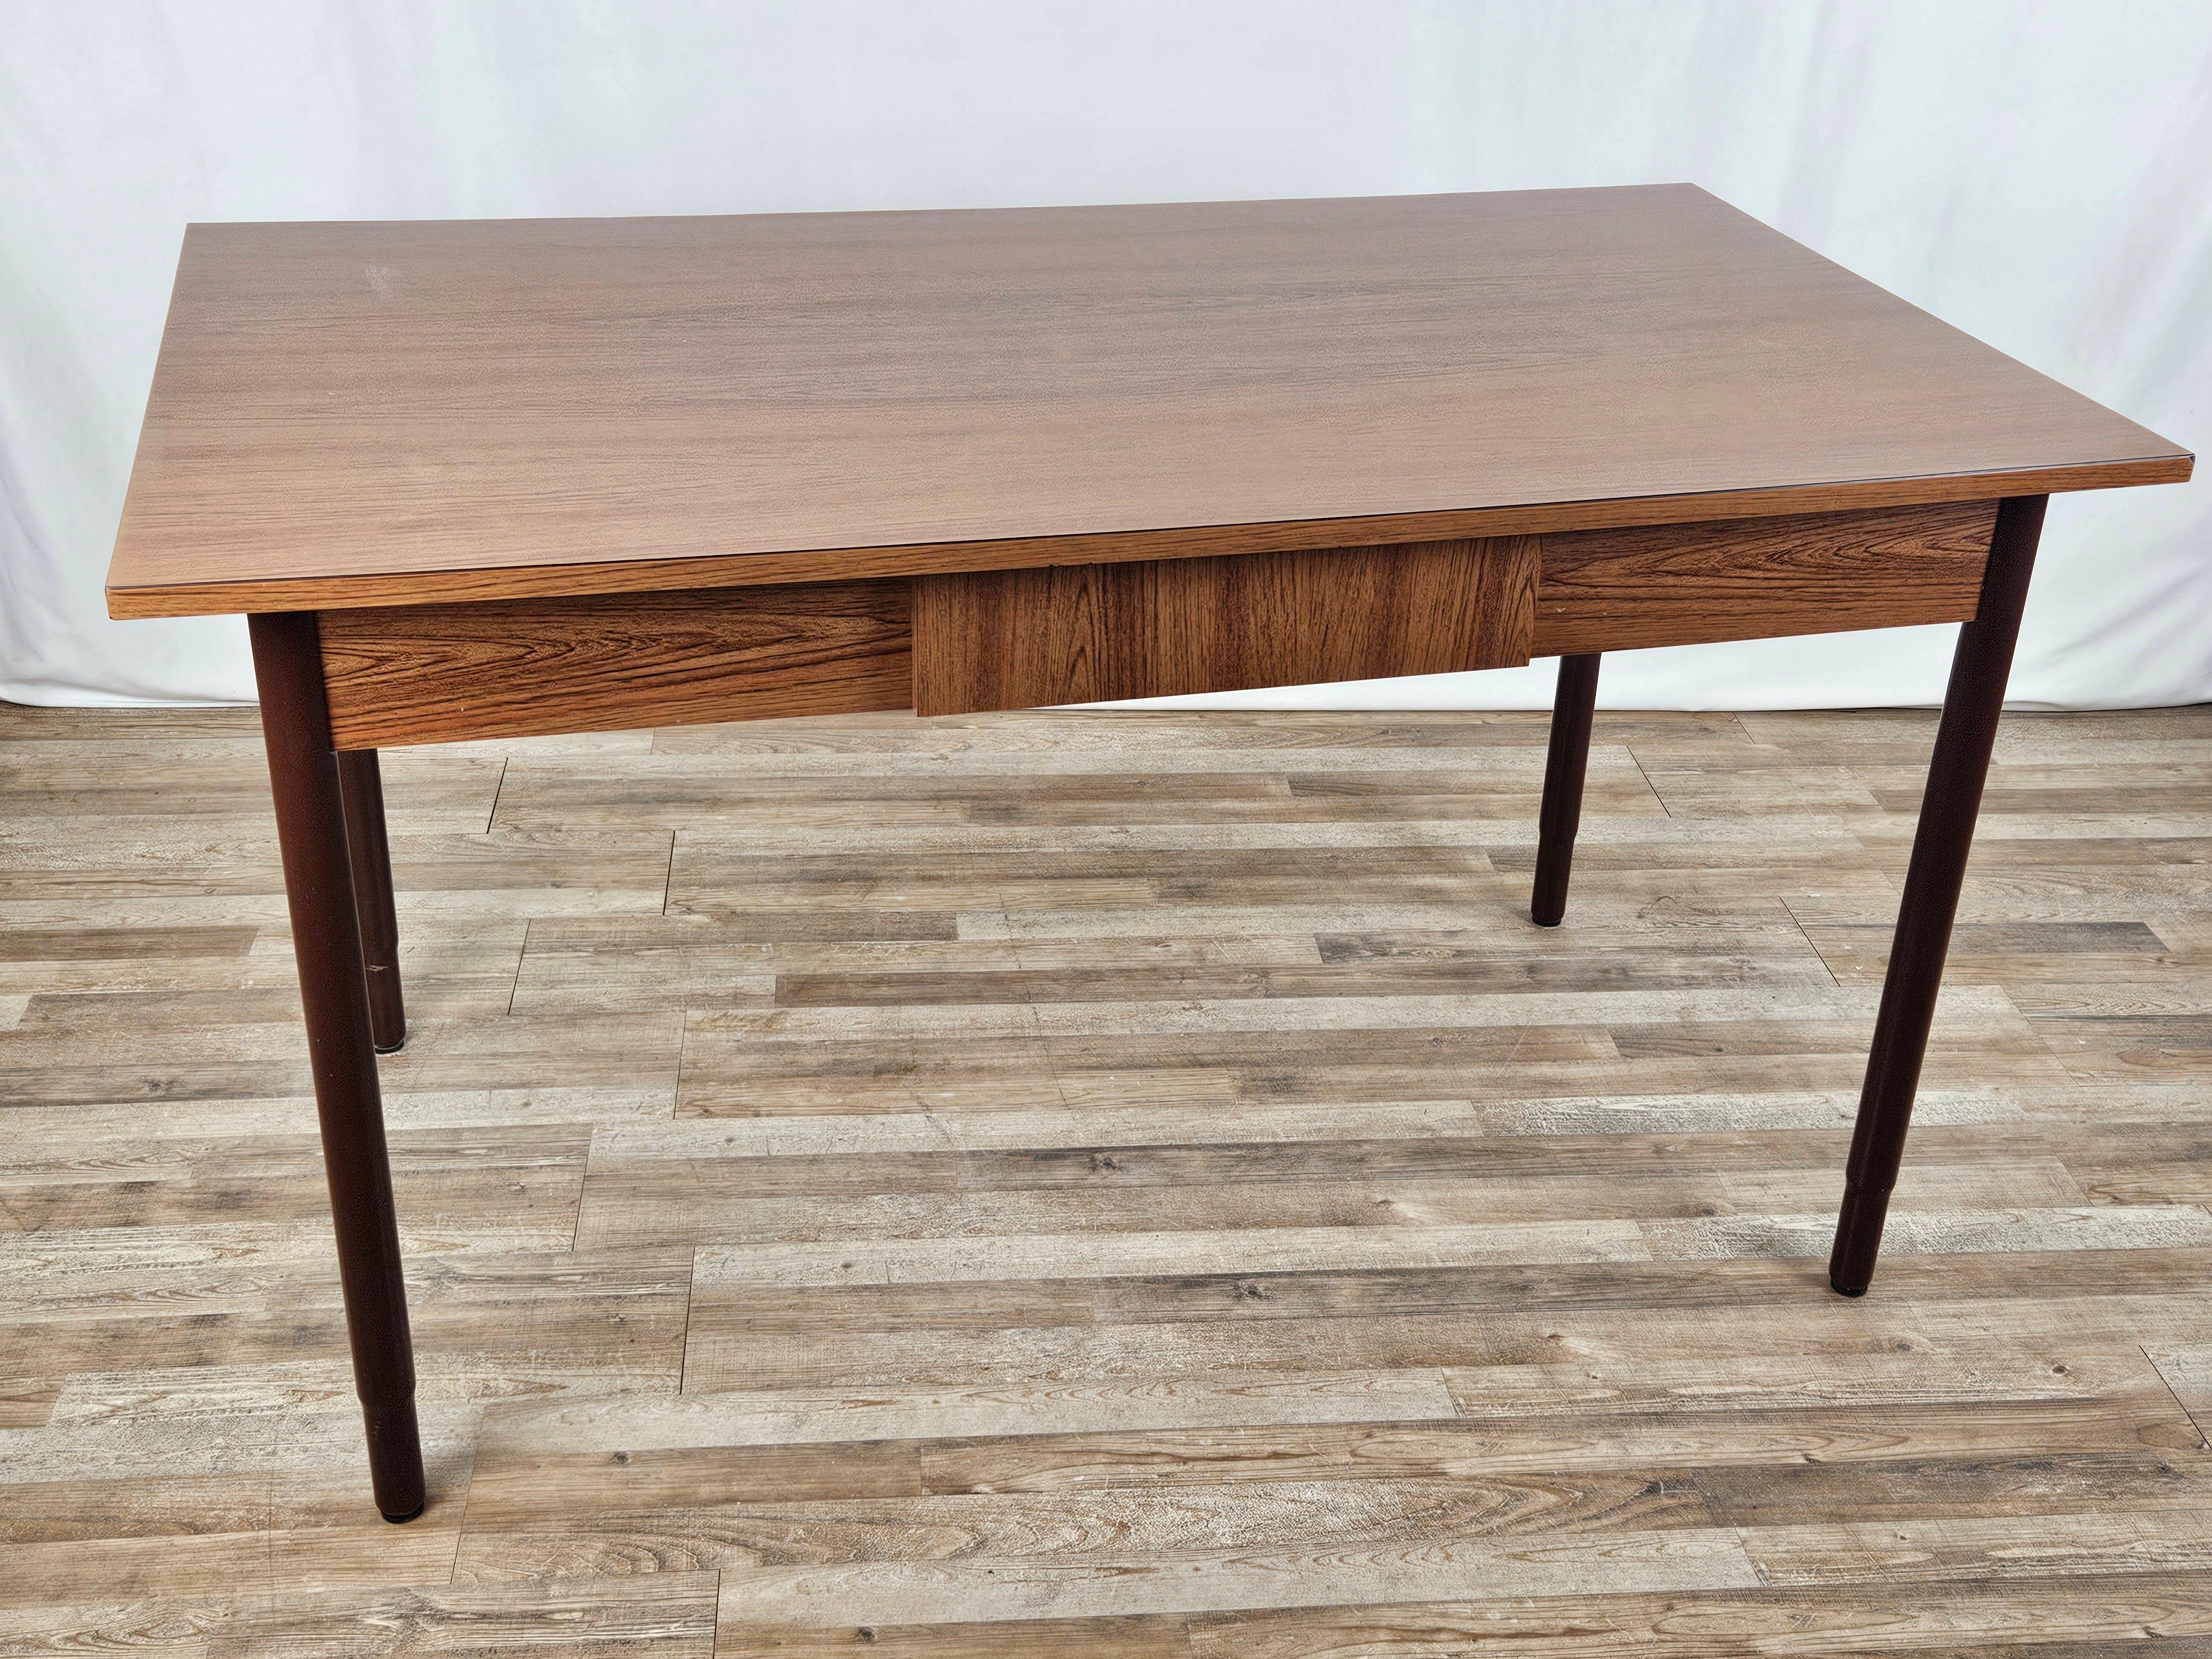 1970s brown formica dining table with metal legs and central drawer.